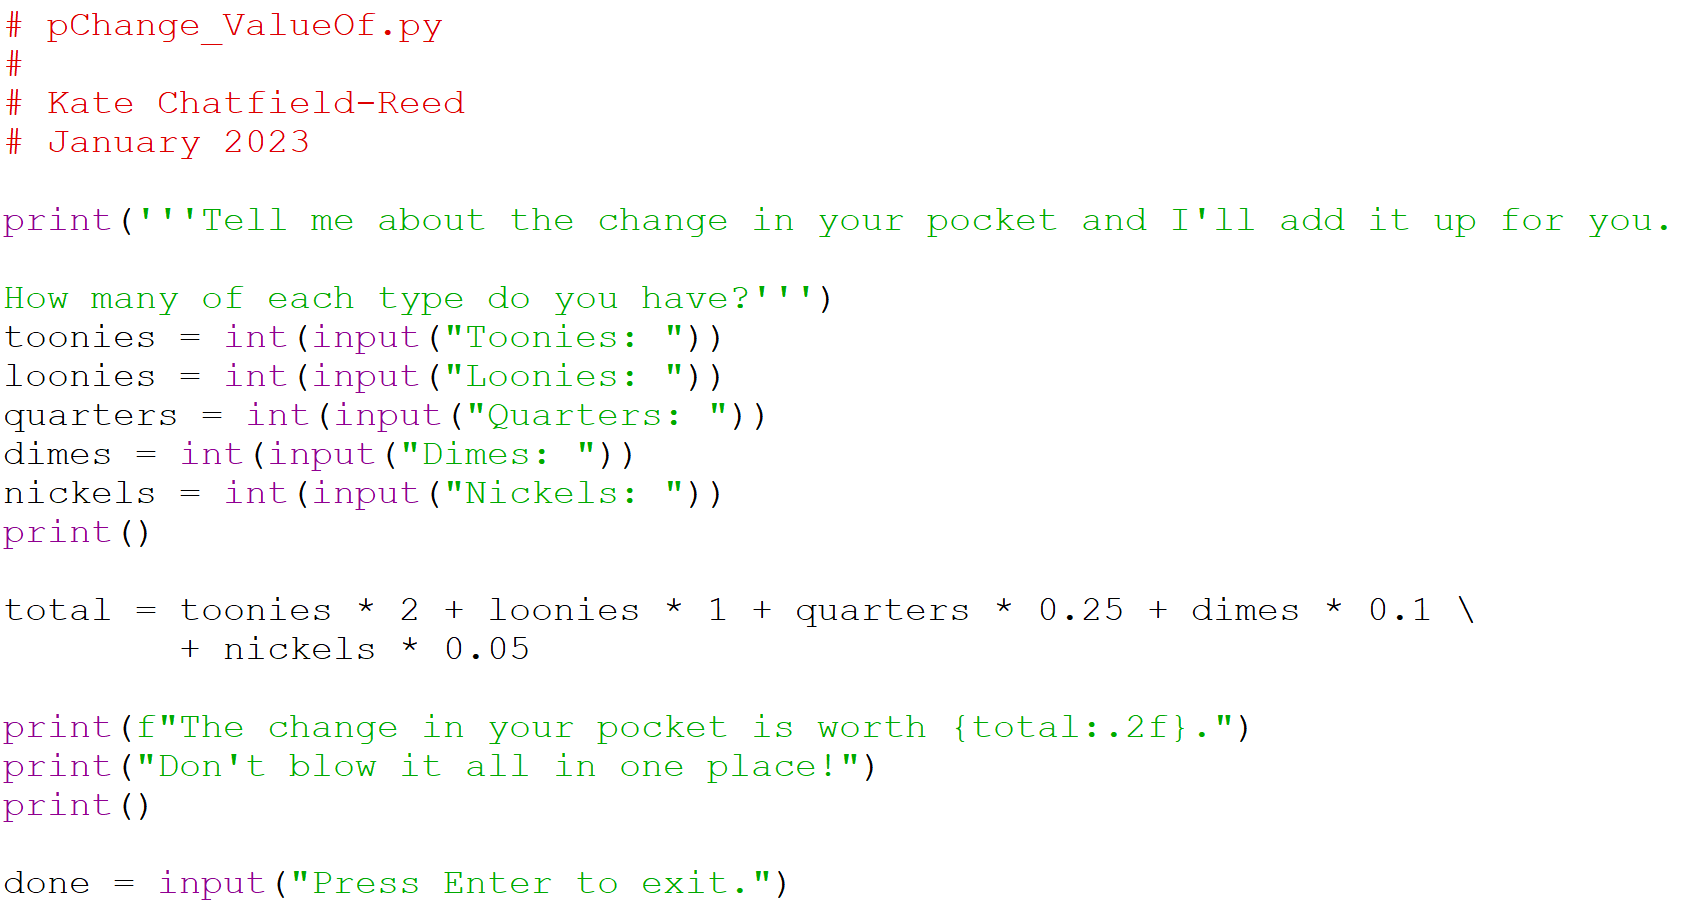 Python code to add up the change in your pocket.